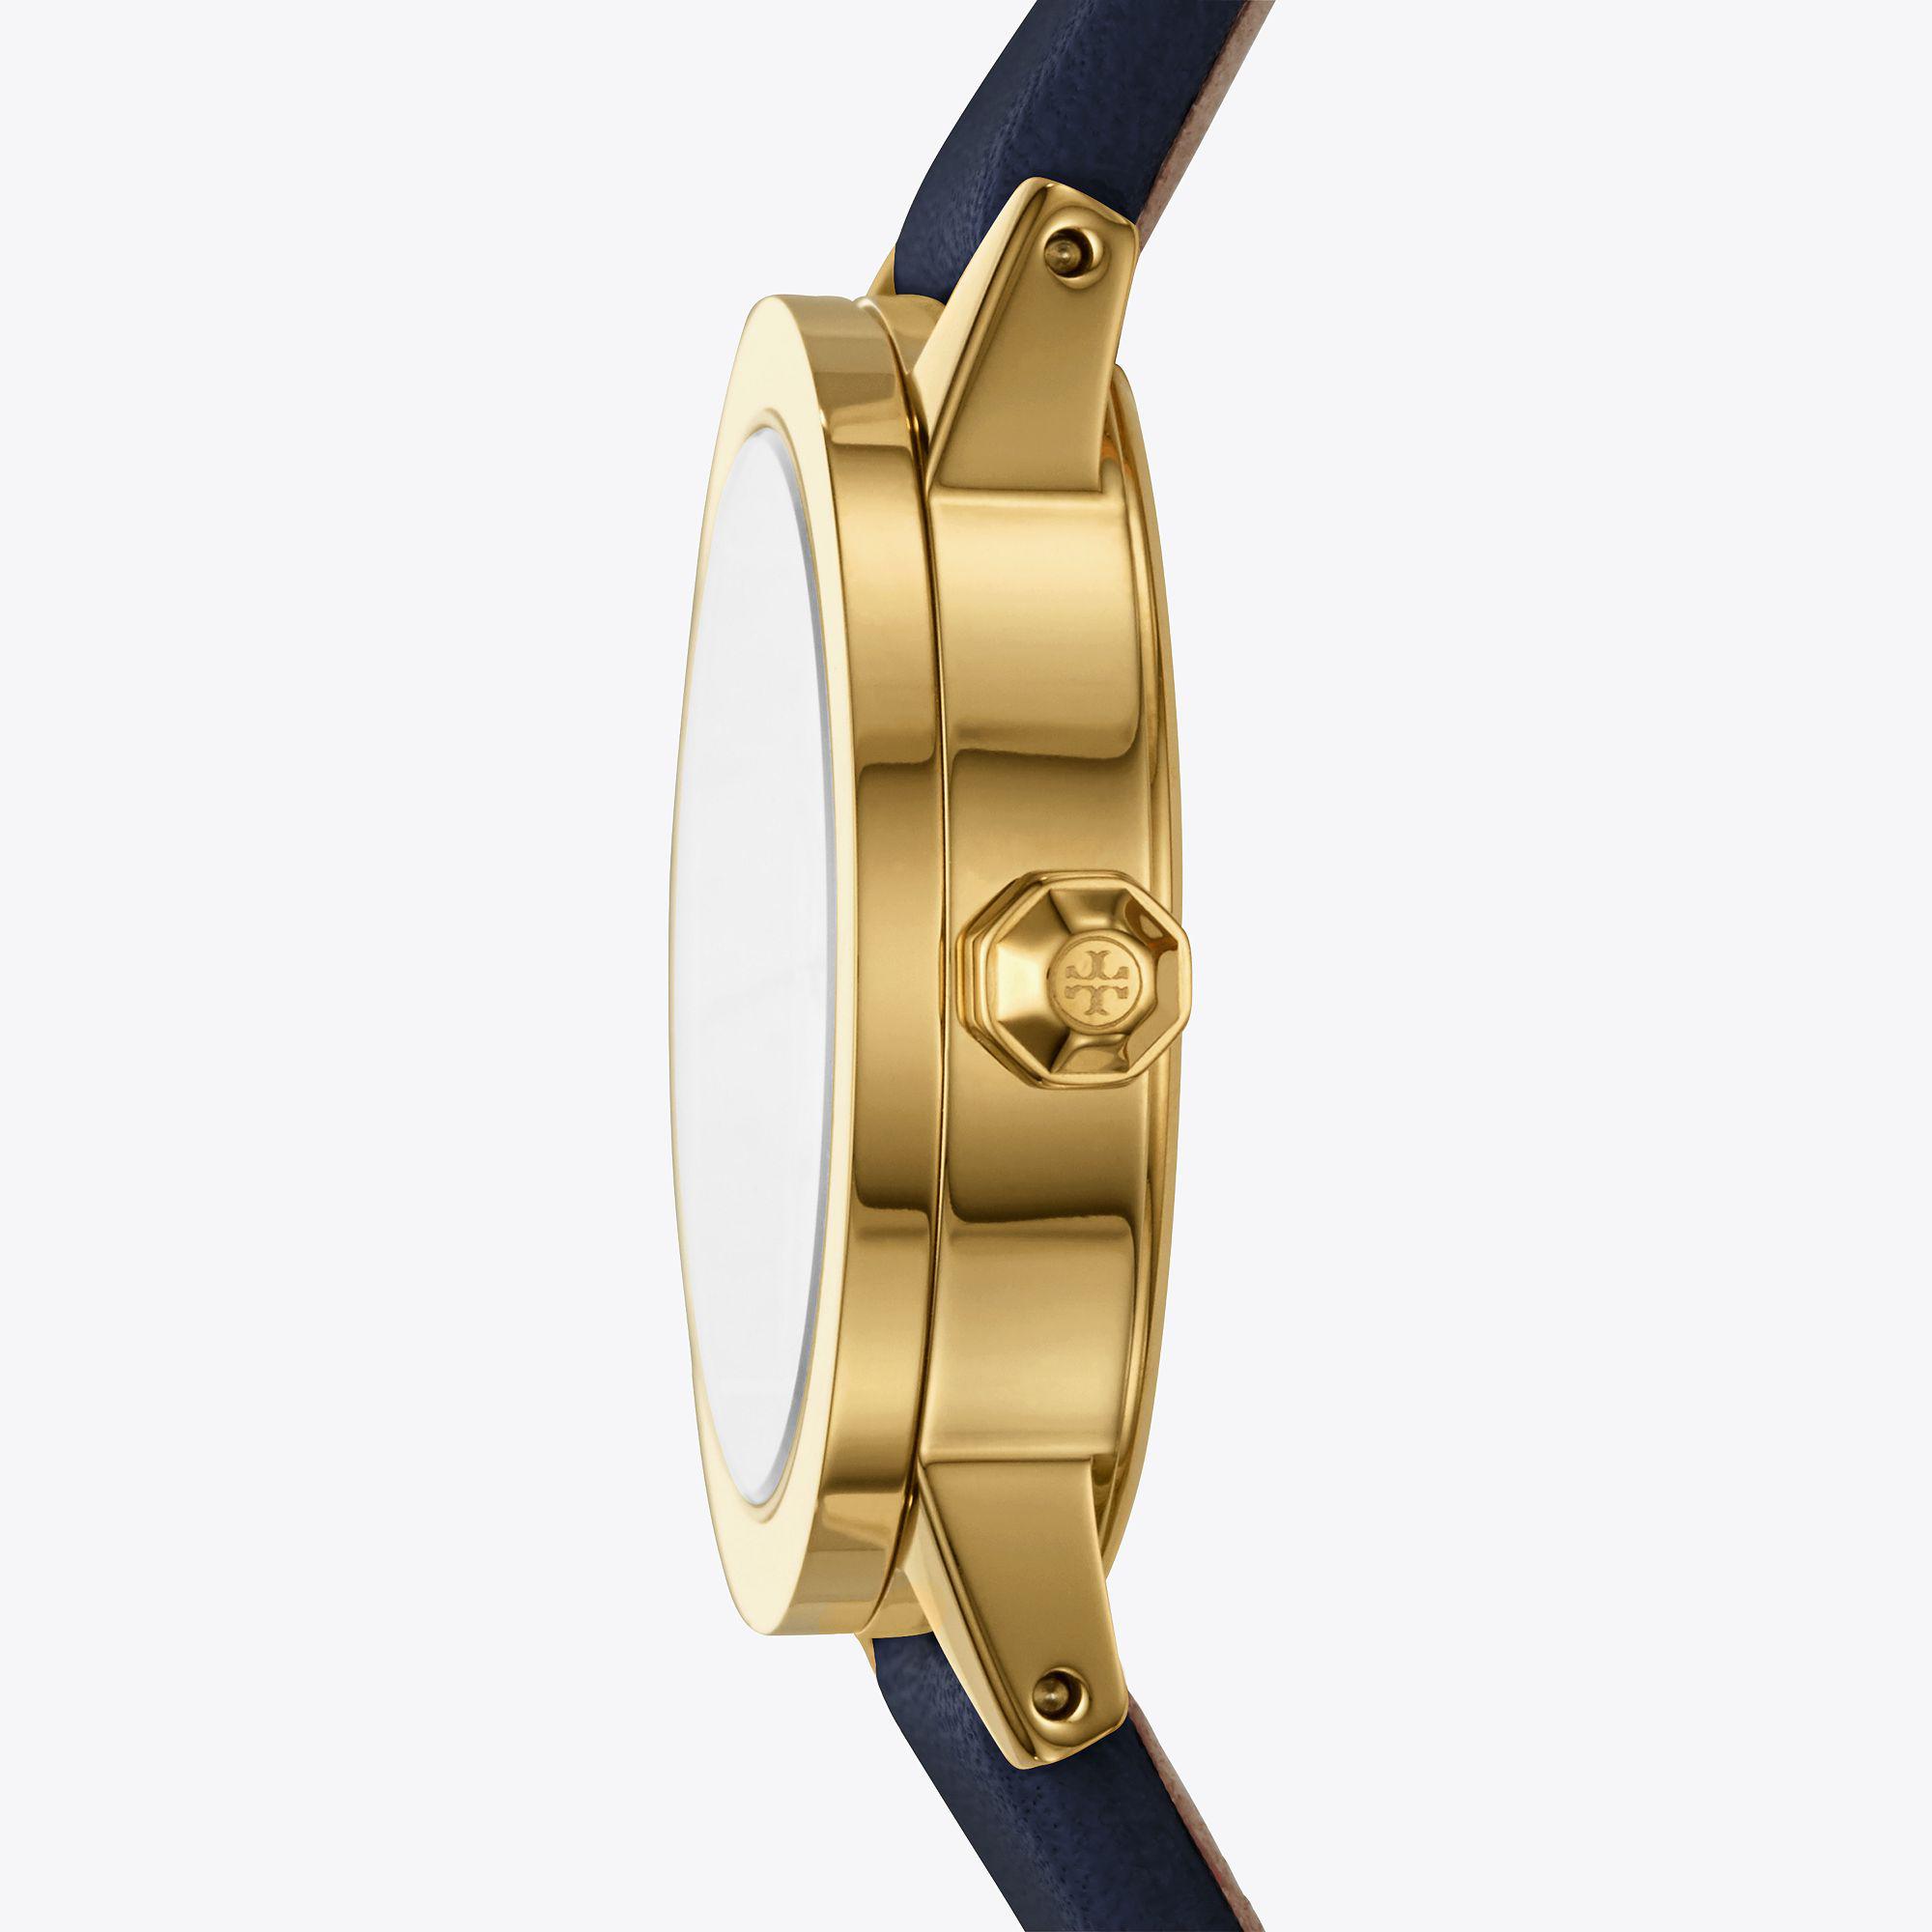 Tory Burch Gigi Watch, Navy Leather/gold-tone, 28 Mm in Gold/Navy 